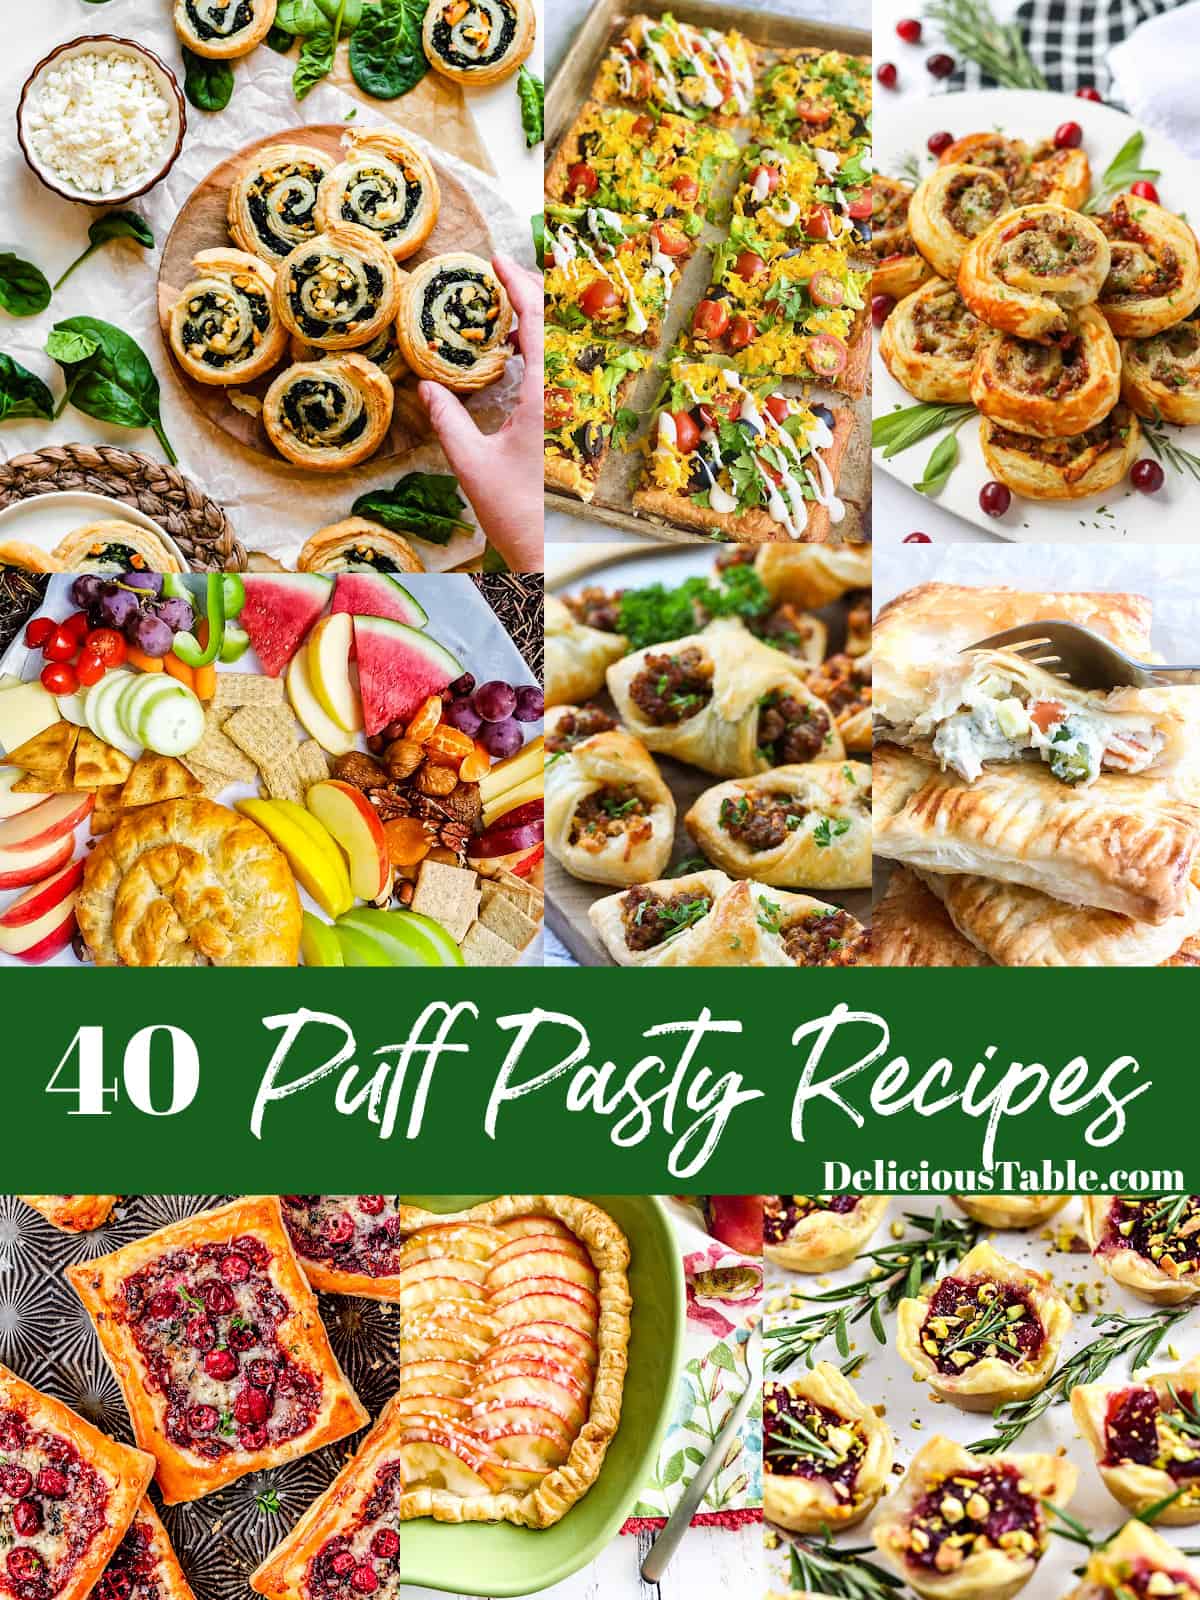 https://www.delicioustable.com/wp-content/uploads/2022/11/40-Puff-Pastry-Recipes.jpg